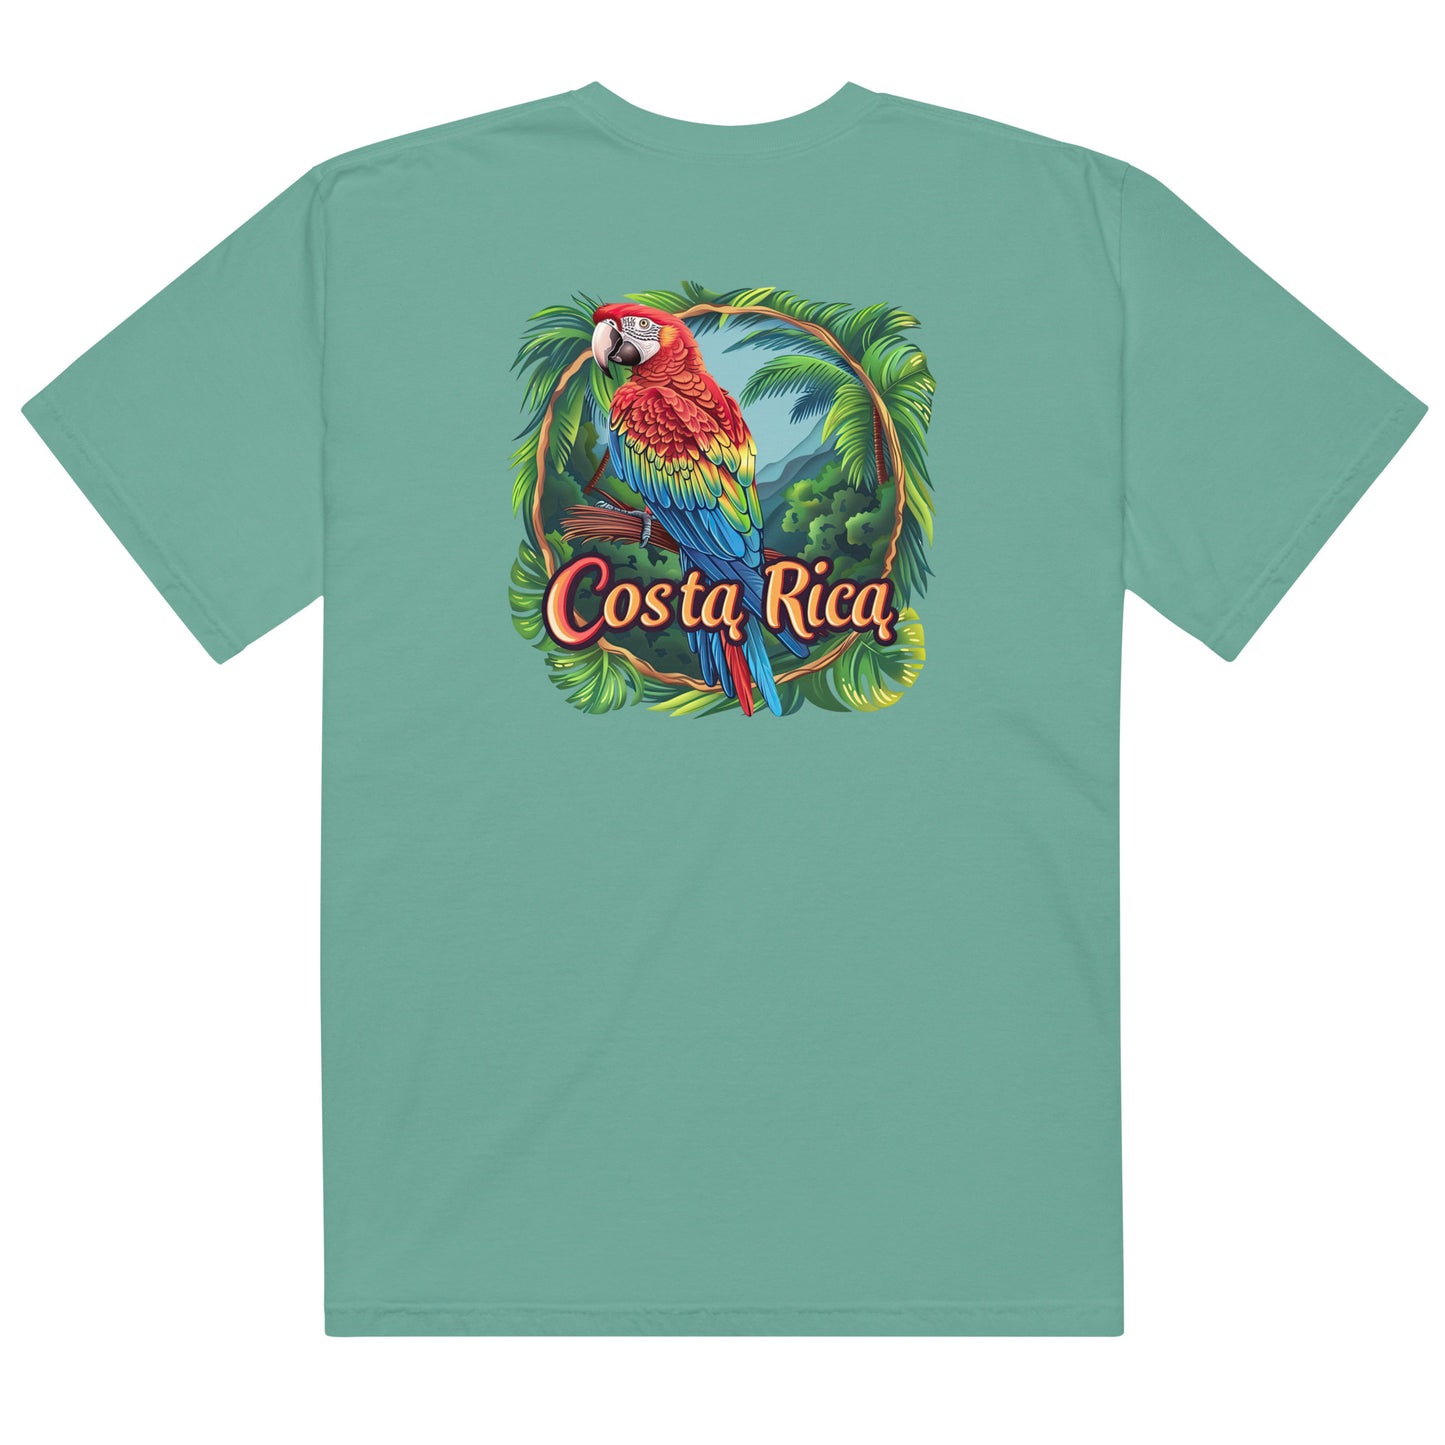 Costa Rica Scarlet Macaw Parrot Unisex t-shirt